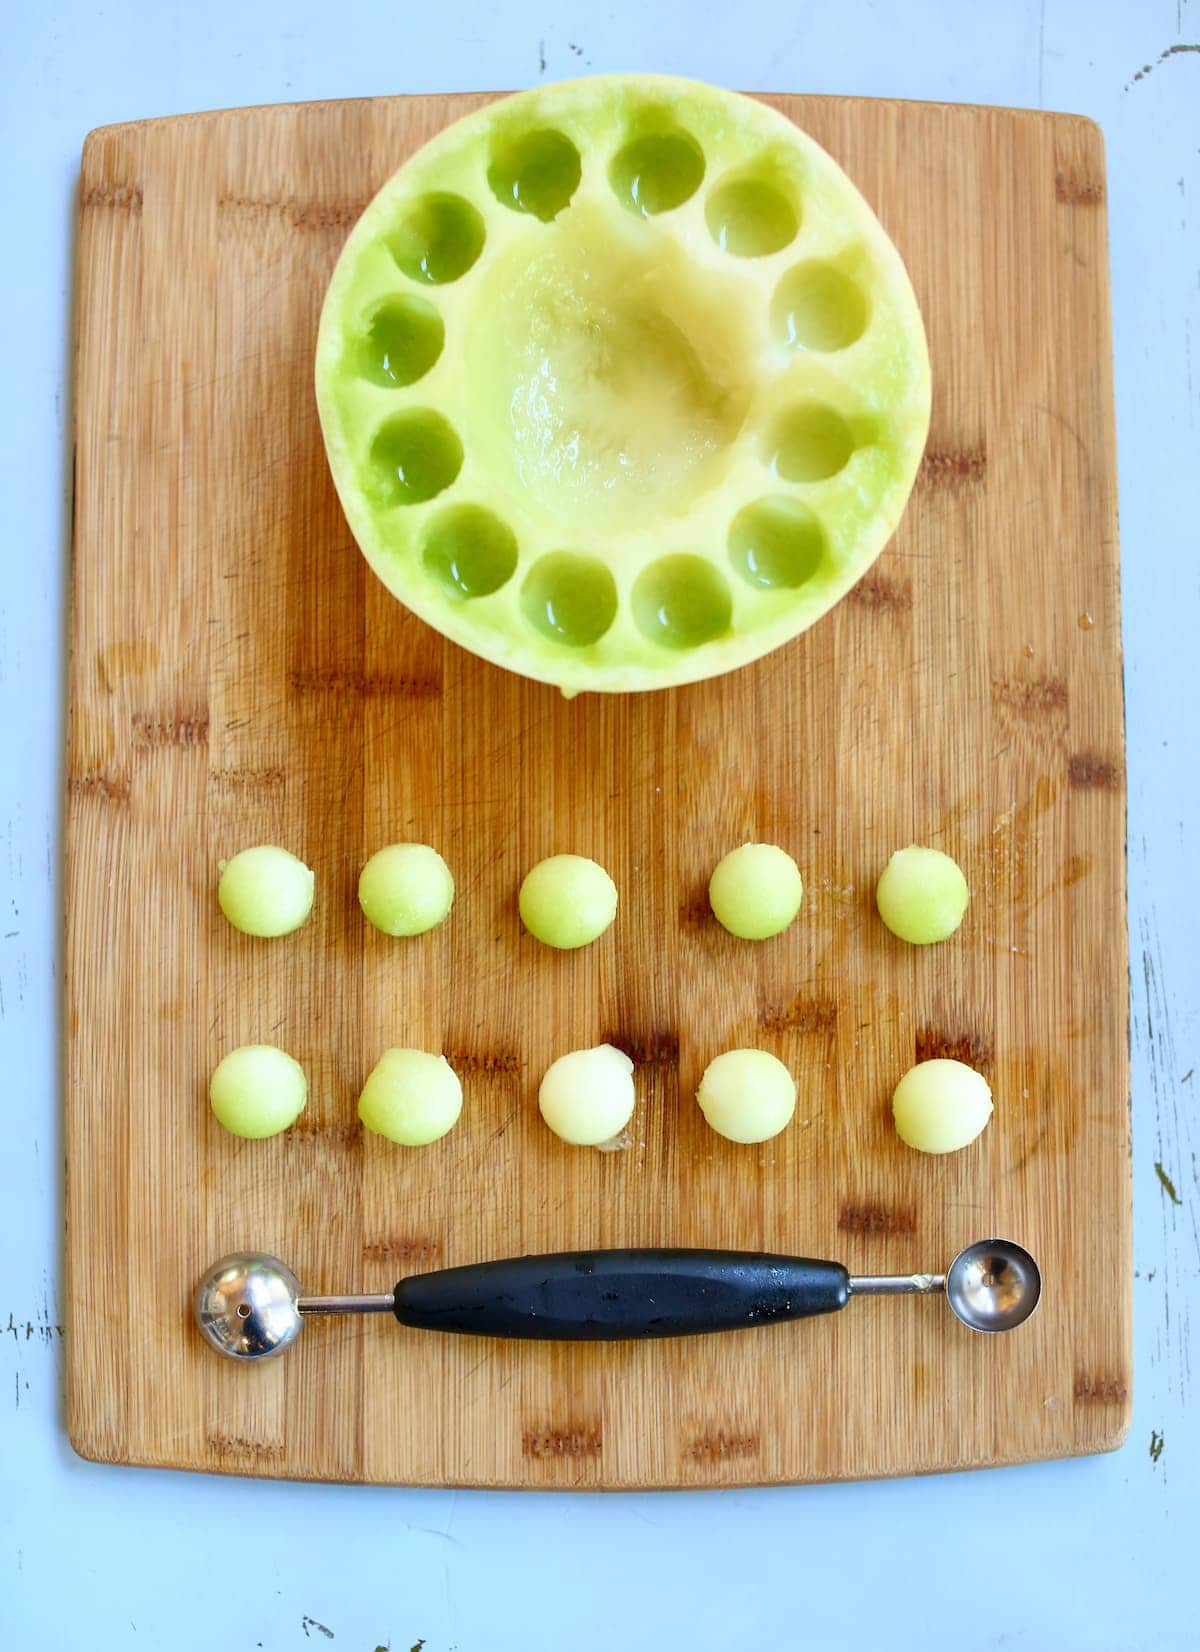 a cutting board with a tray of melon balls and melon baller.